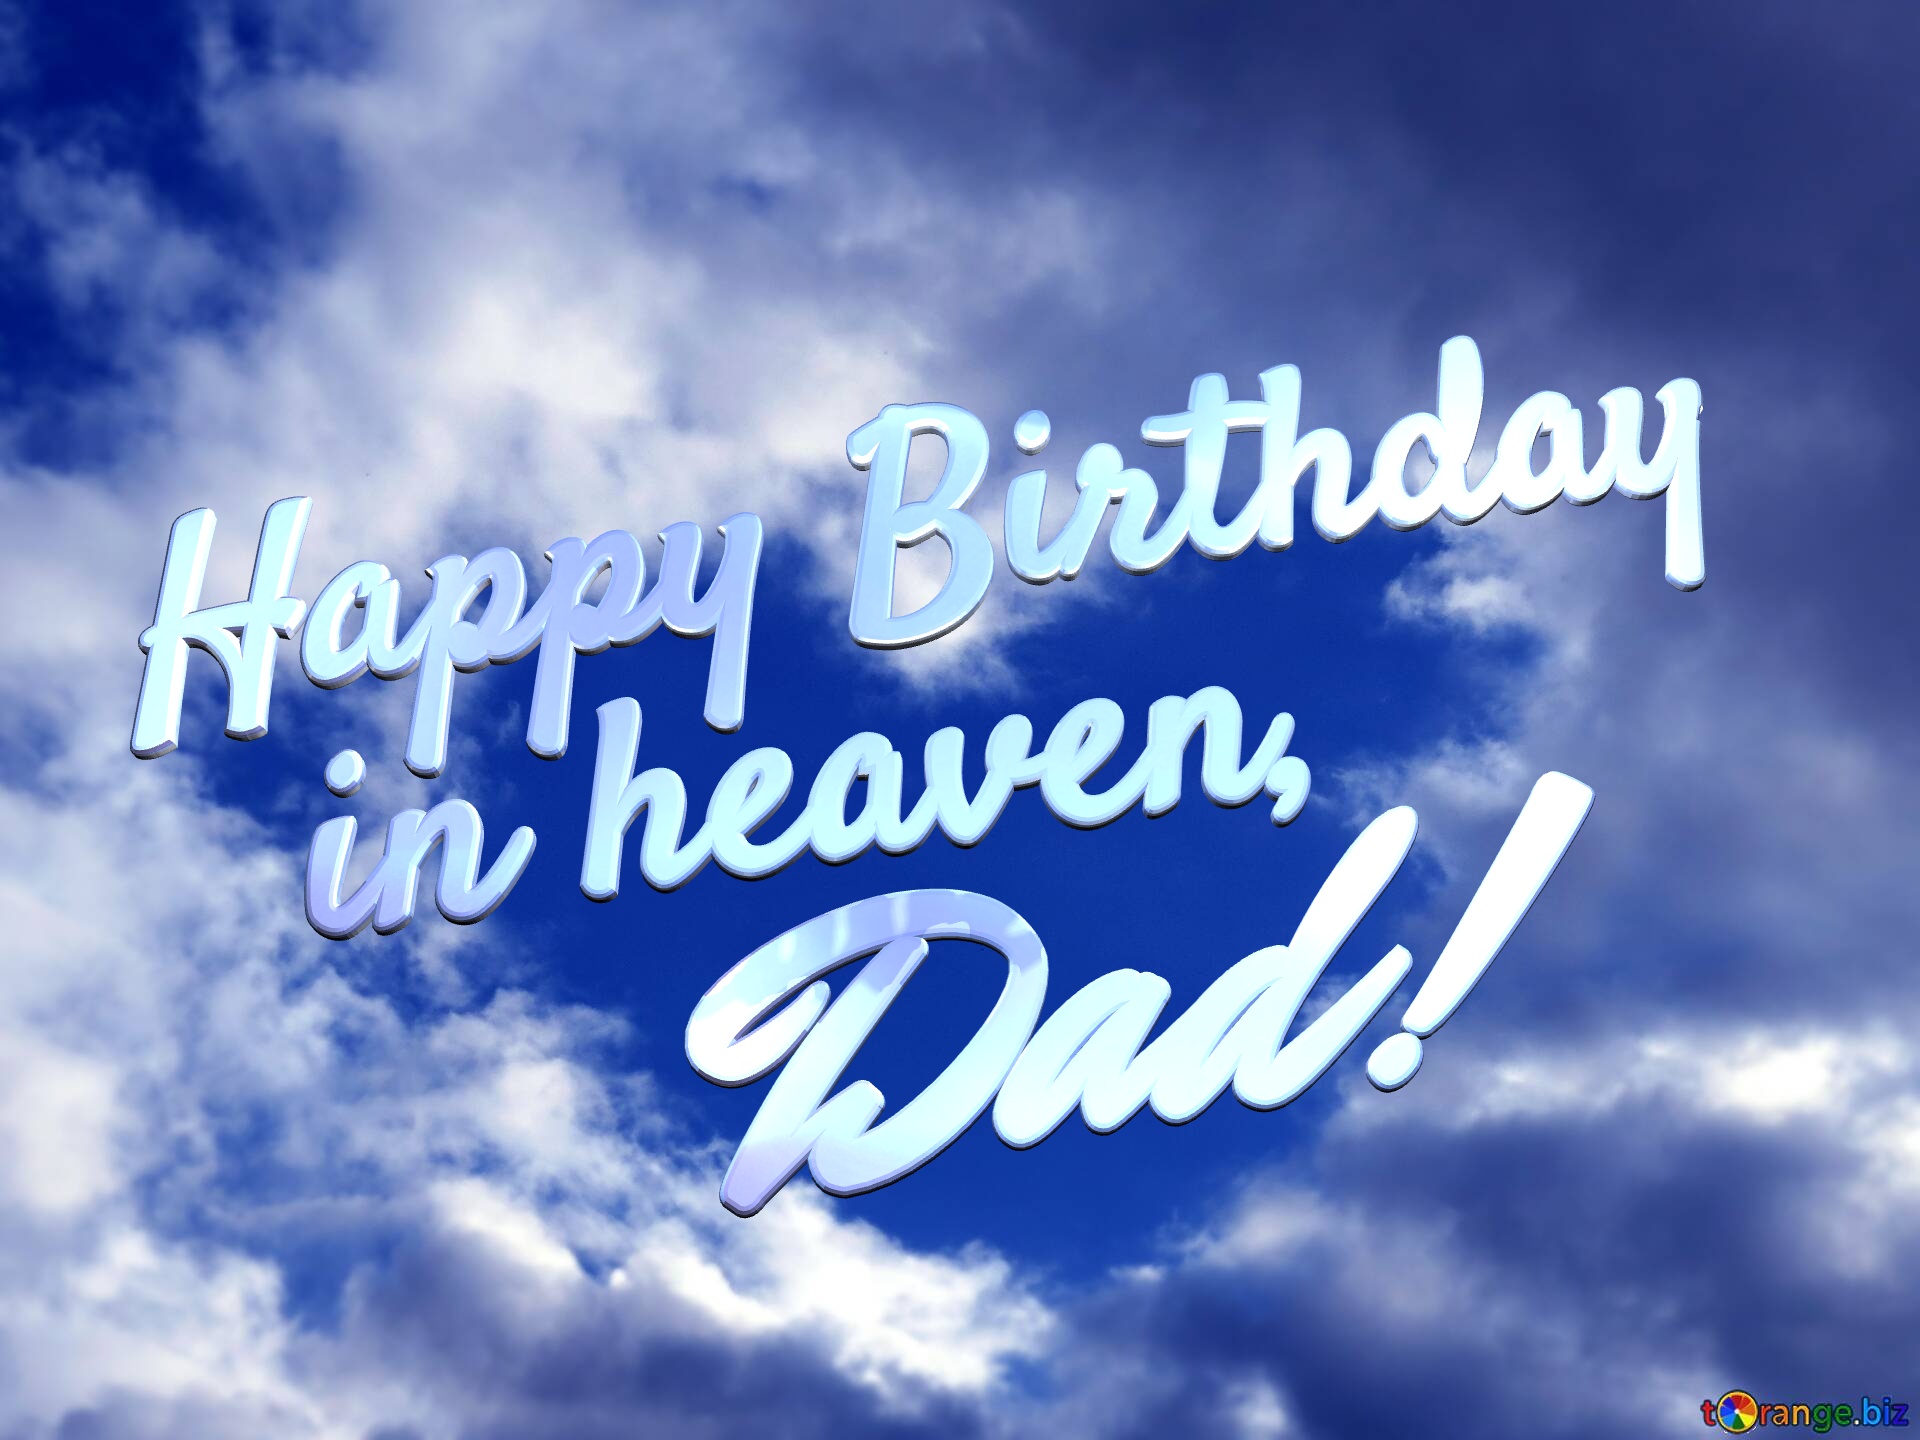 Happy Birthday In Heaven, Dad! Free Image - 3546